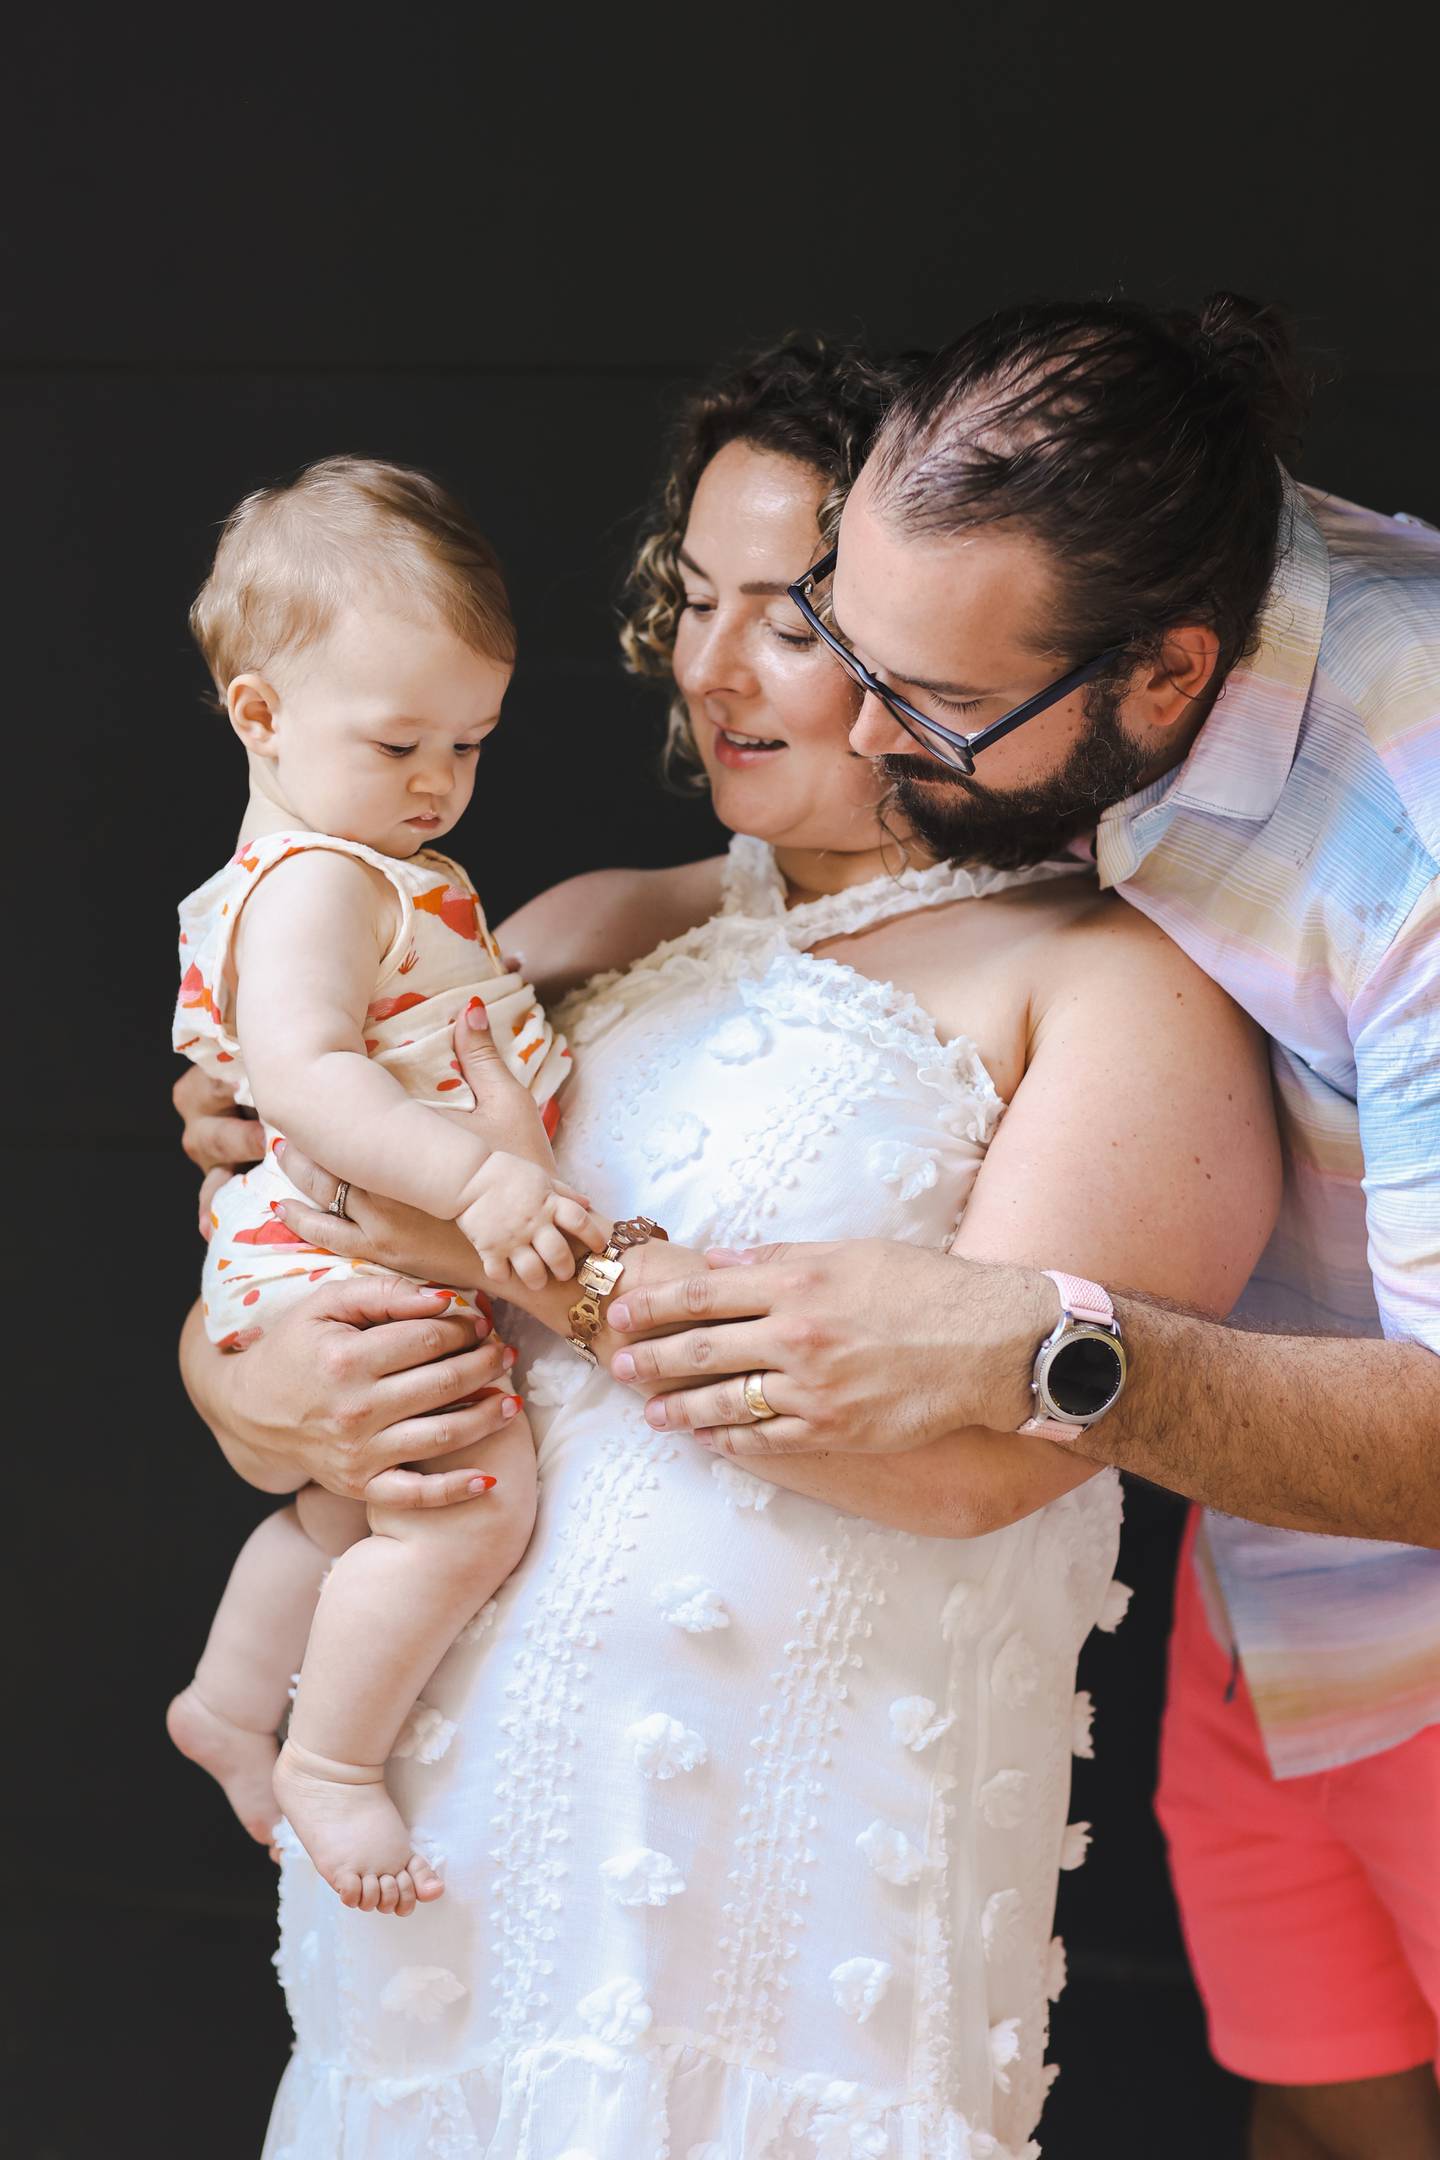 Rosemary Mac Cabe with husband Brandin Wallace and baby Atlas. Photograph:
Helen Maser Photography